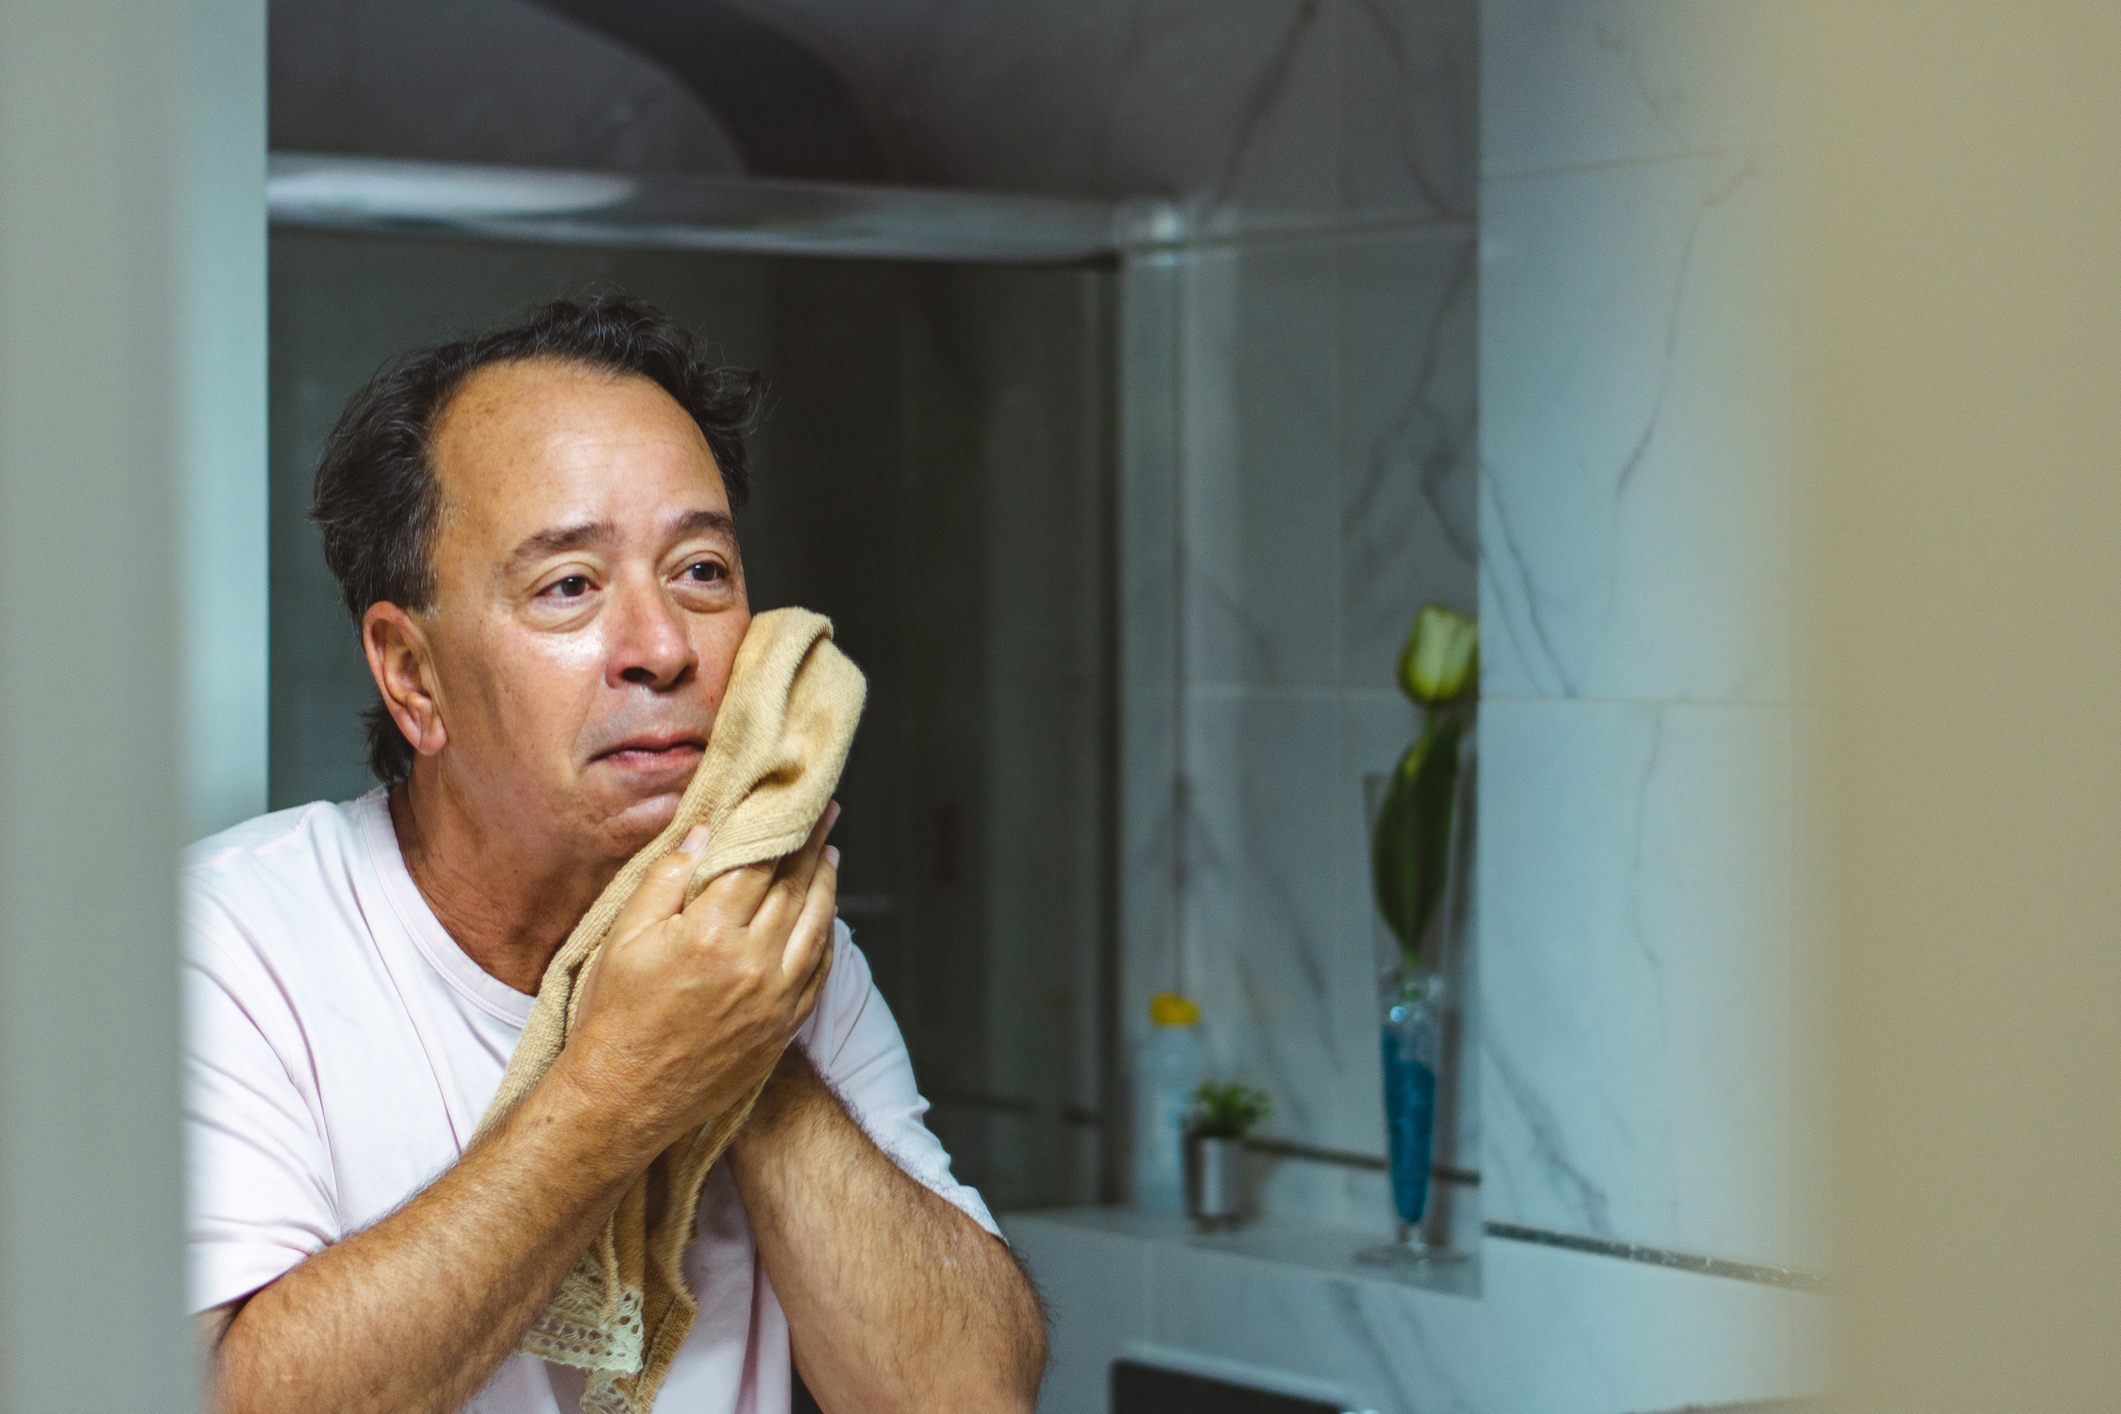 Person in a white shirt wiping their face with a beige towel in front of a mirror